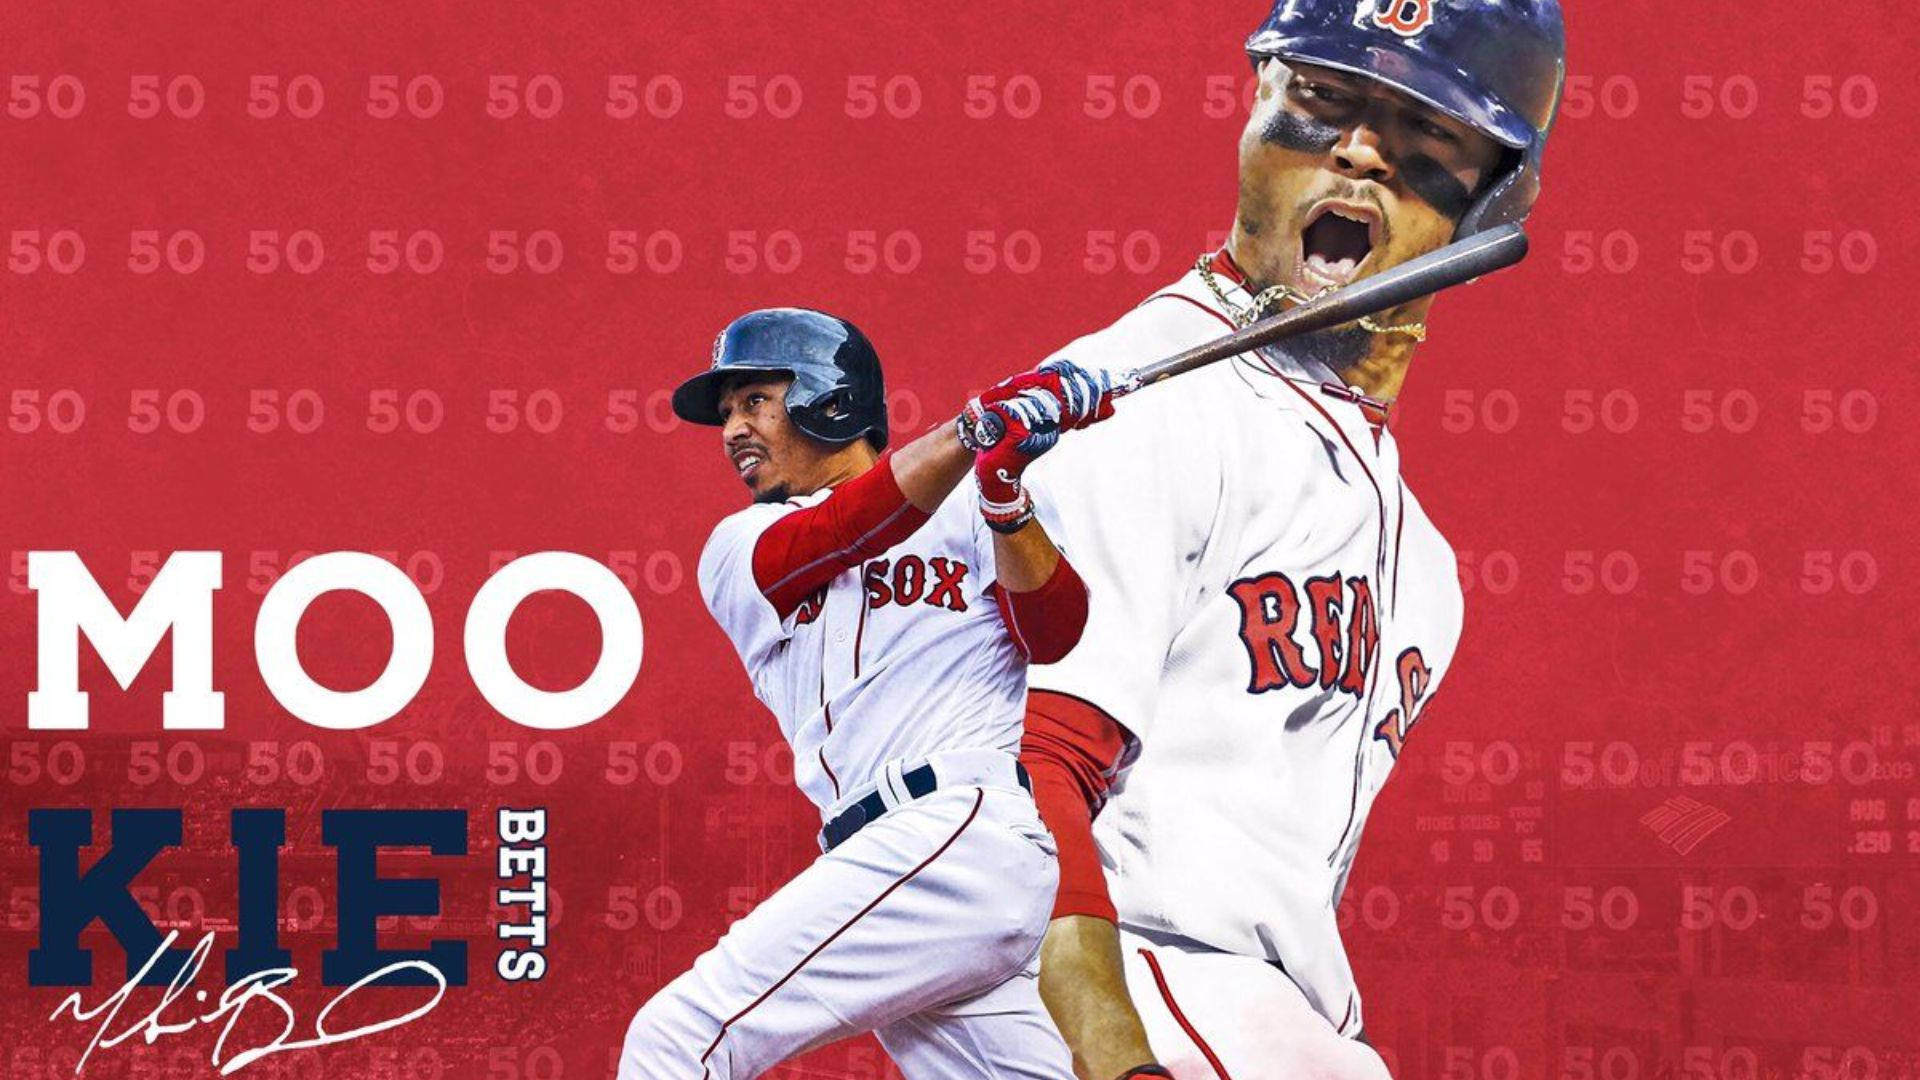 Top 999+ Mookie Betts Wallpaper Full HD, 4K✅Free to Use